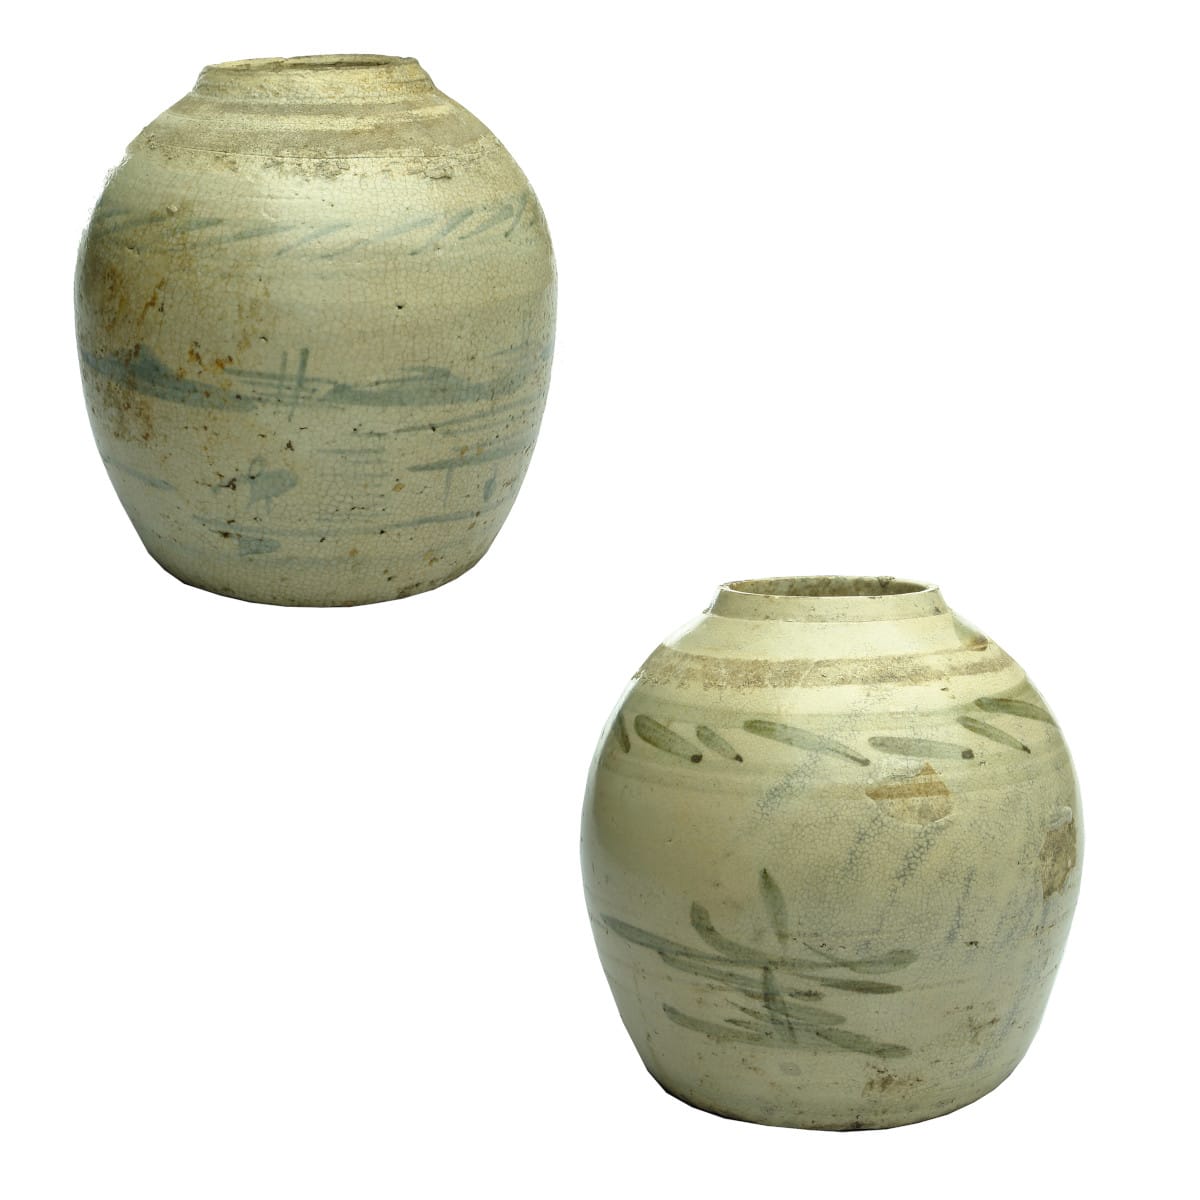 Two large Chinese Ginger Jars. Blue and Grey-Green brush strokes decoration.